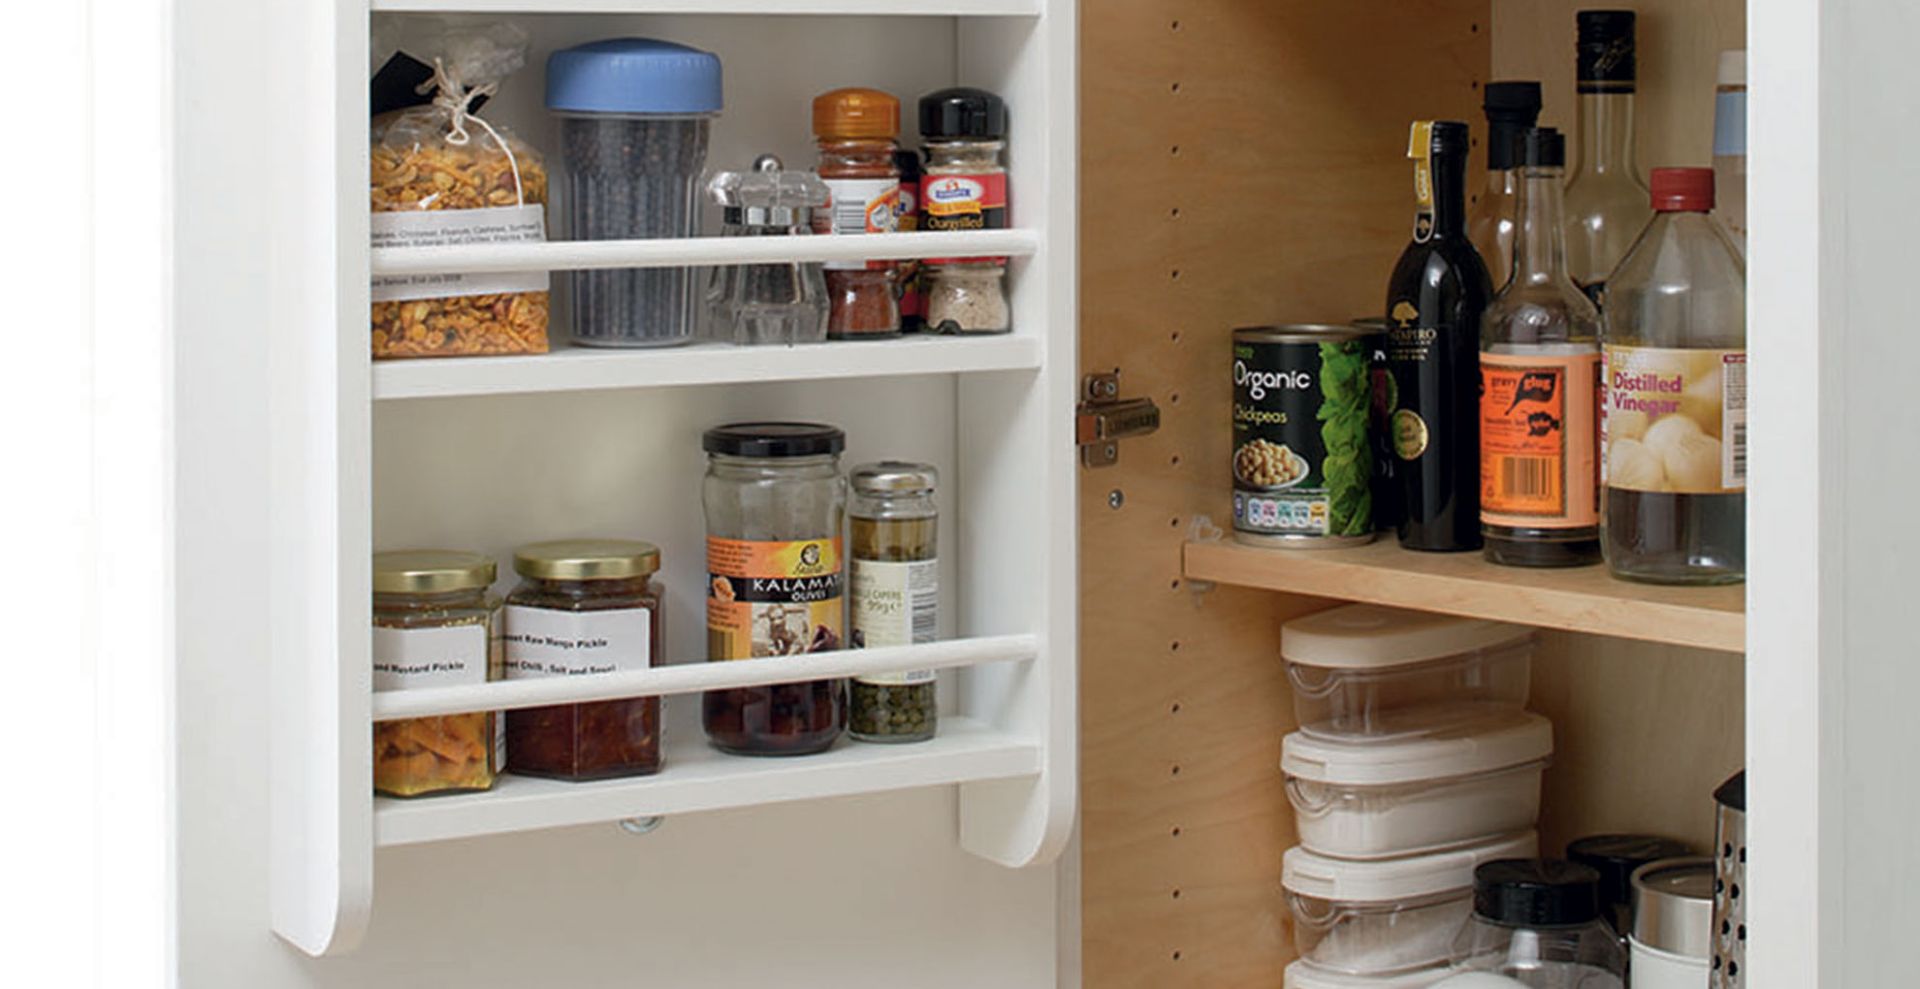 How to organize kitchen cabinets: ways to instantly declutter your space